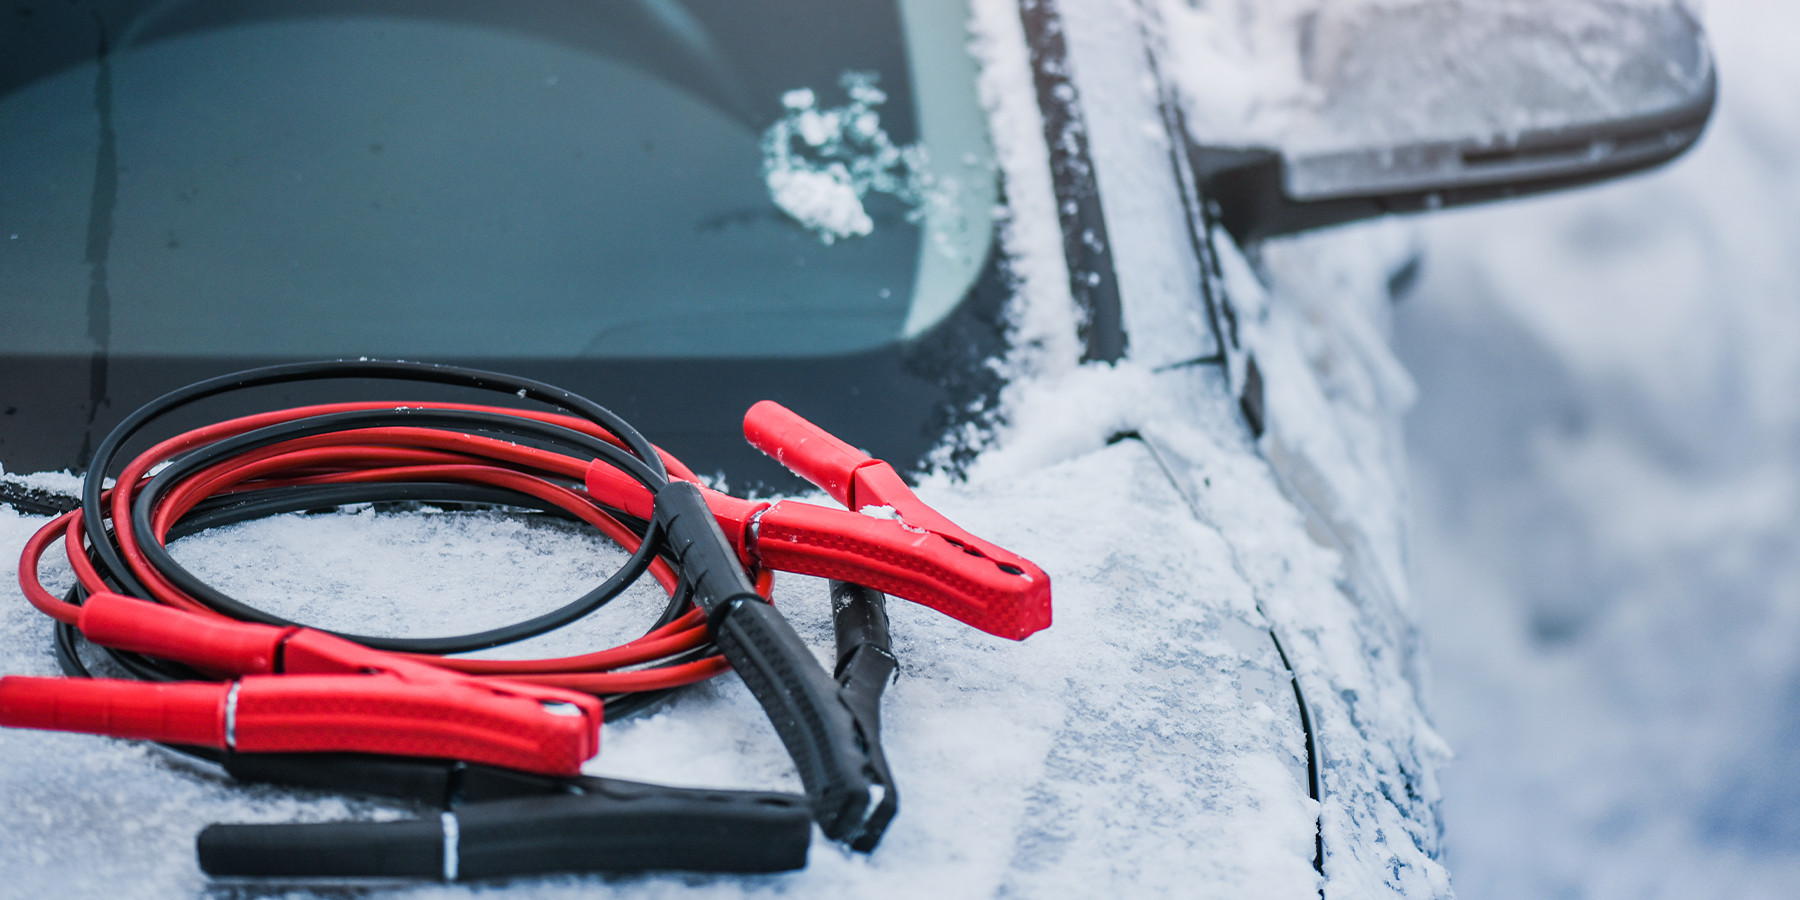 Choosing the Best Jump Starter - Jumper Cables on Car